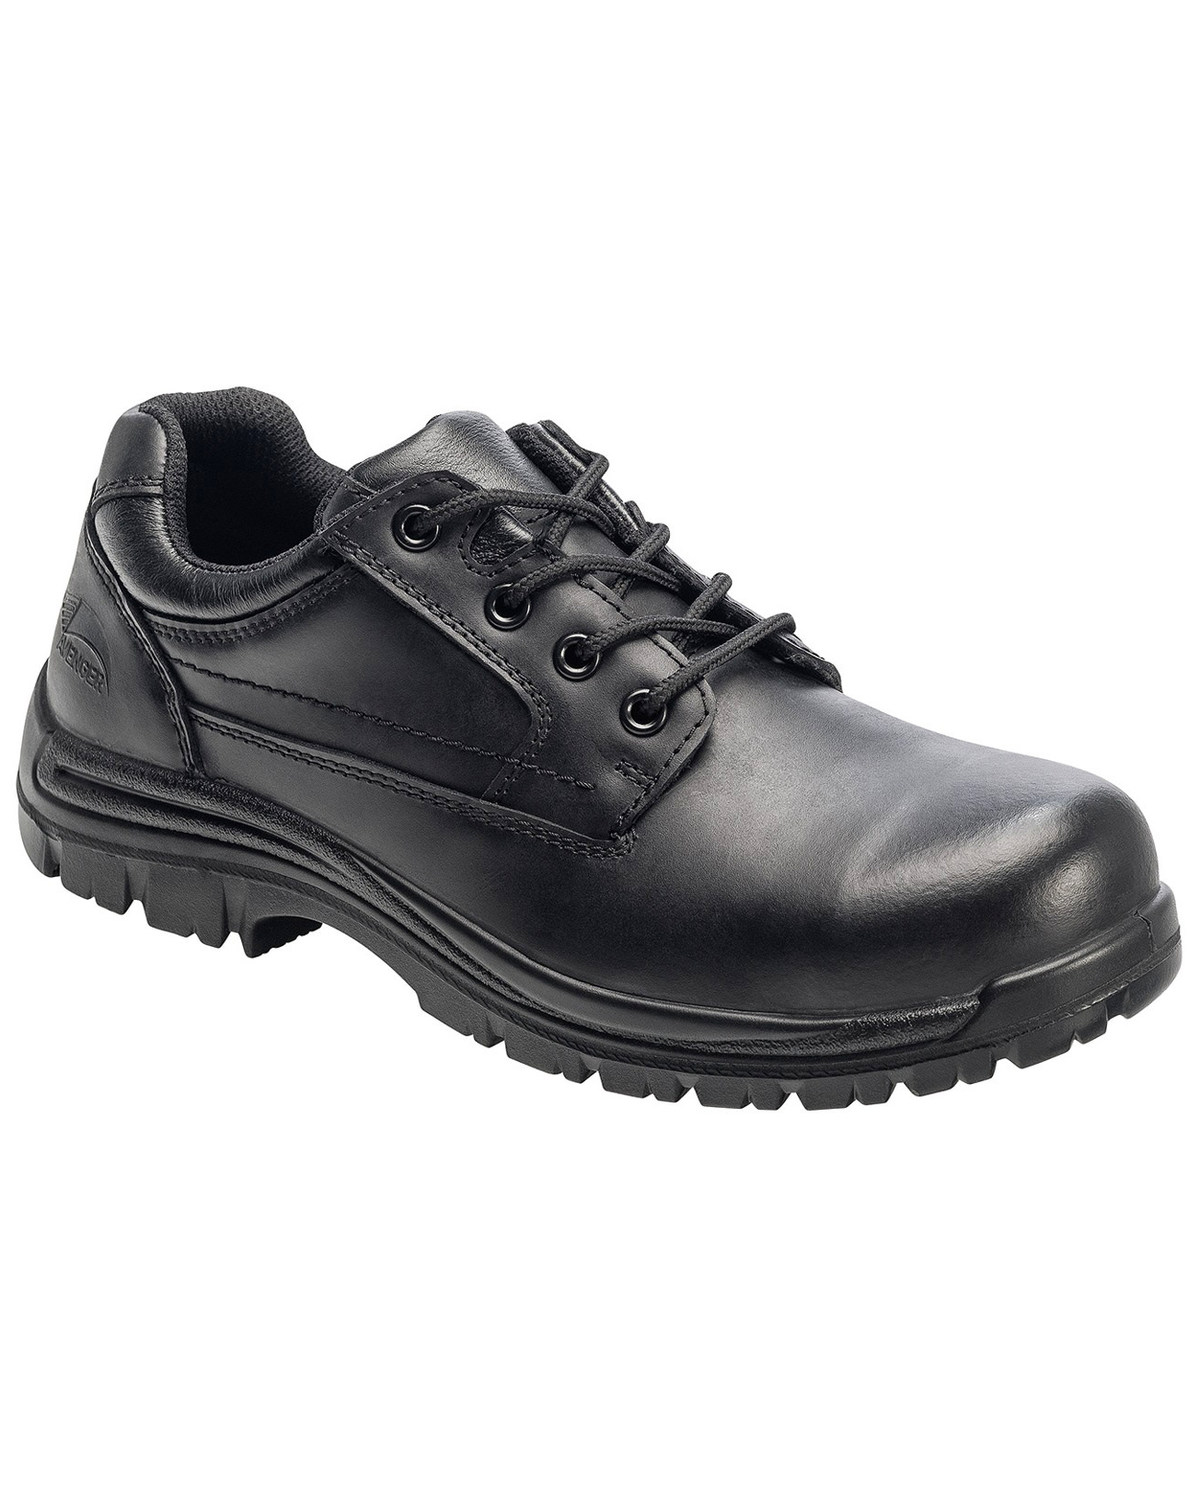 slip resistant oxford work shoes